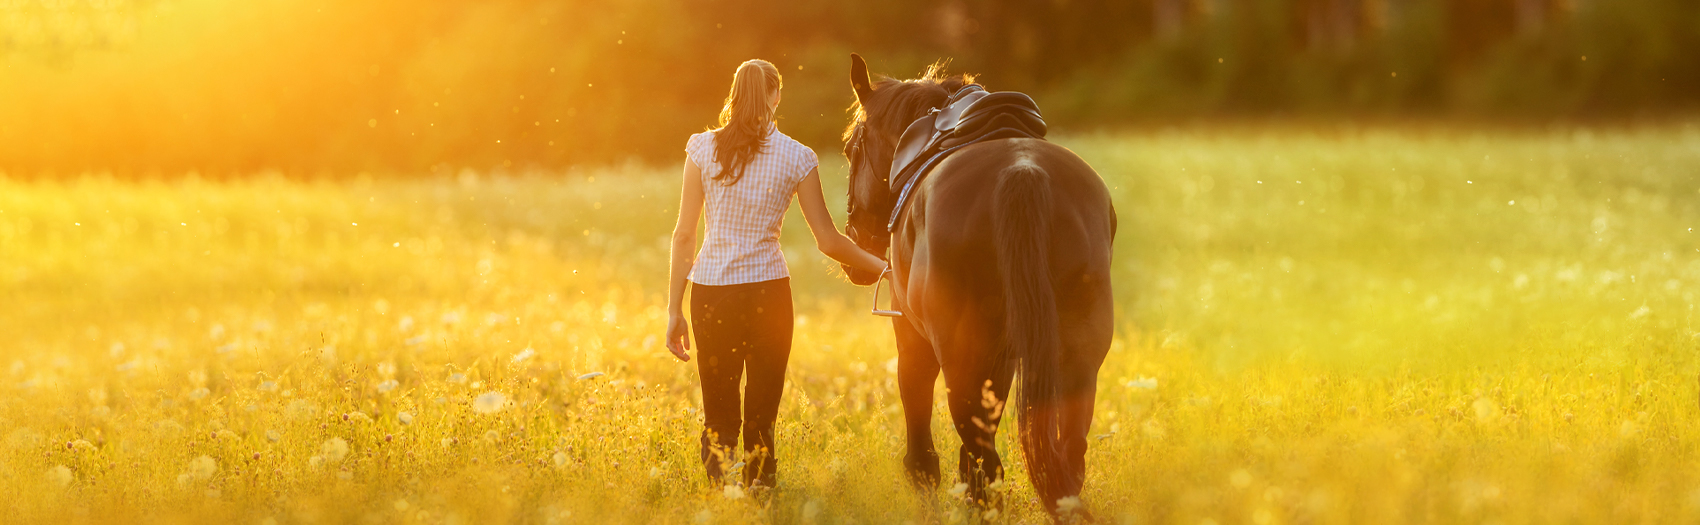 An image of a woman walking with a horse. This image represents a session of equine therapy with an equine therapist in Powhatan, VA. Learn about the benefits of therapy with horses here. | 23229 | 23221 | 23225